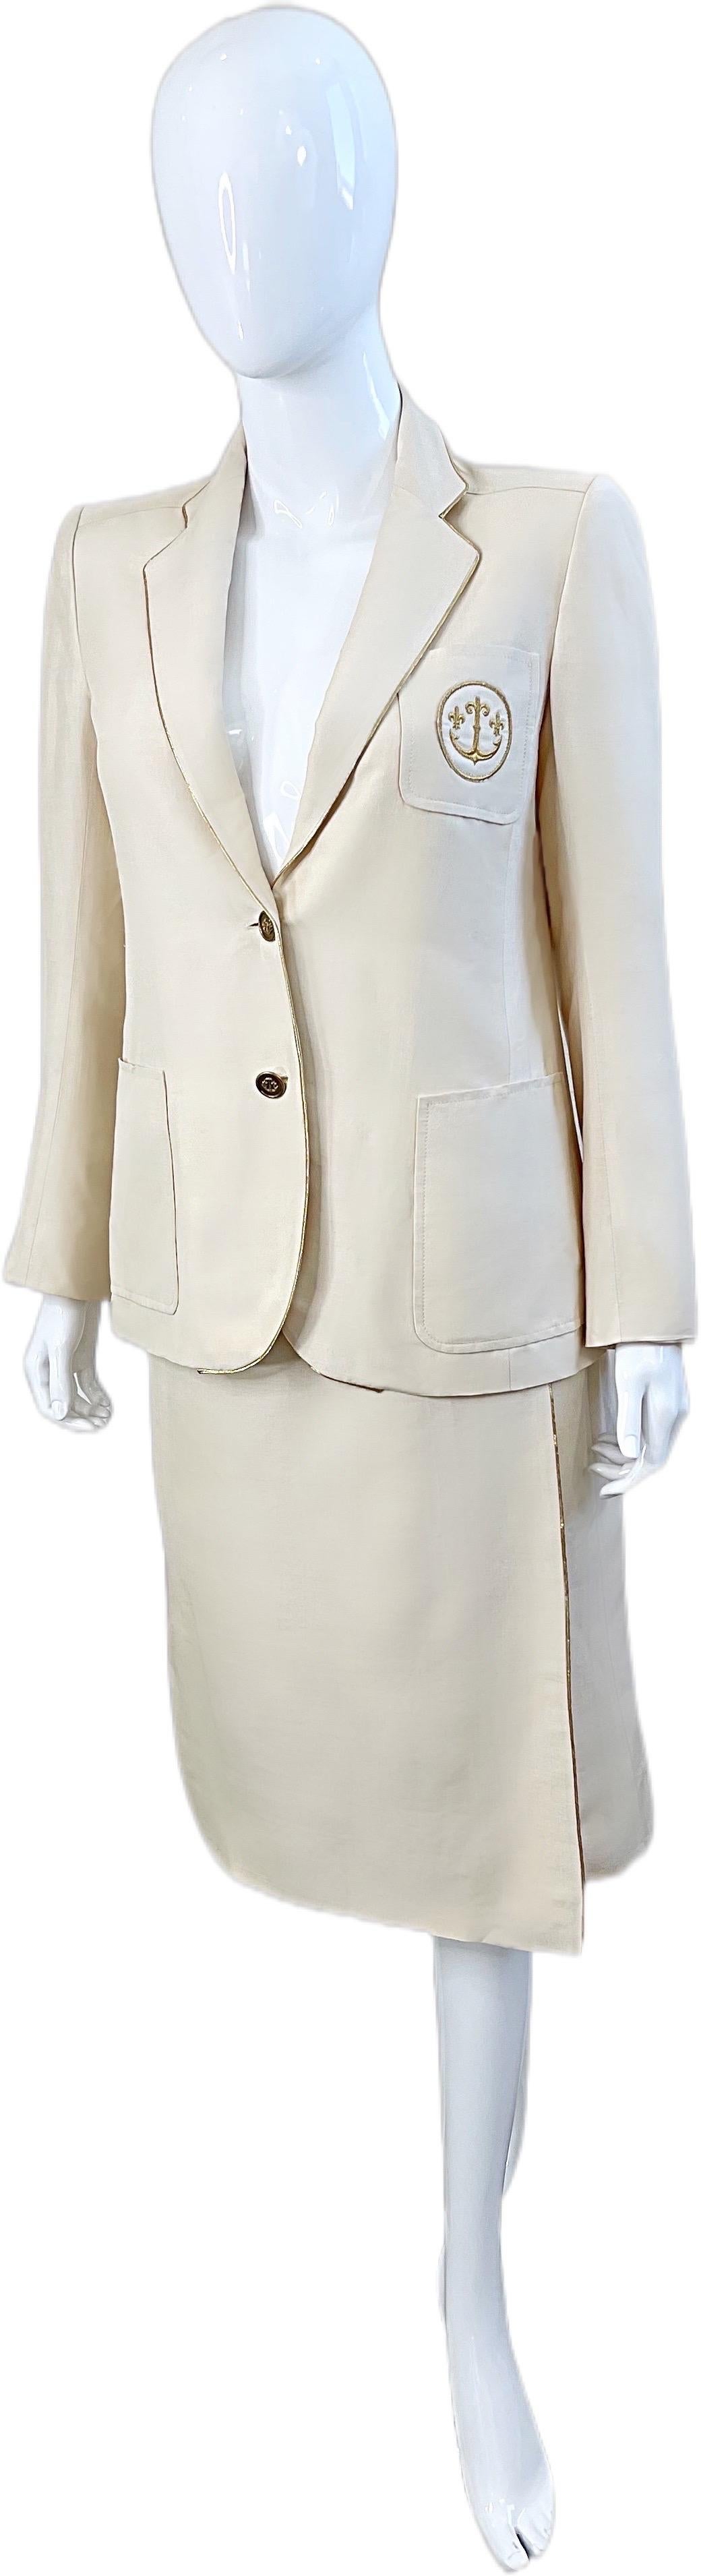 Ted Lapidus Haute Couture 1970s Nautical Ivory Anchor Vintage Silk Skirt Suit For Sale 9